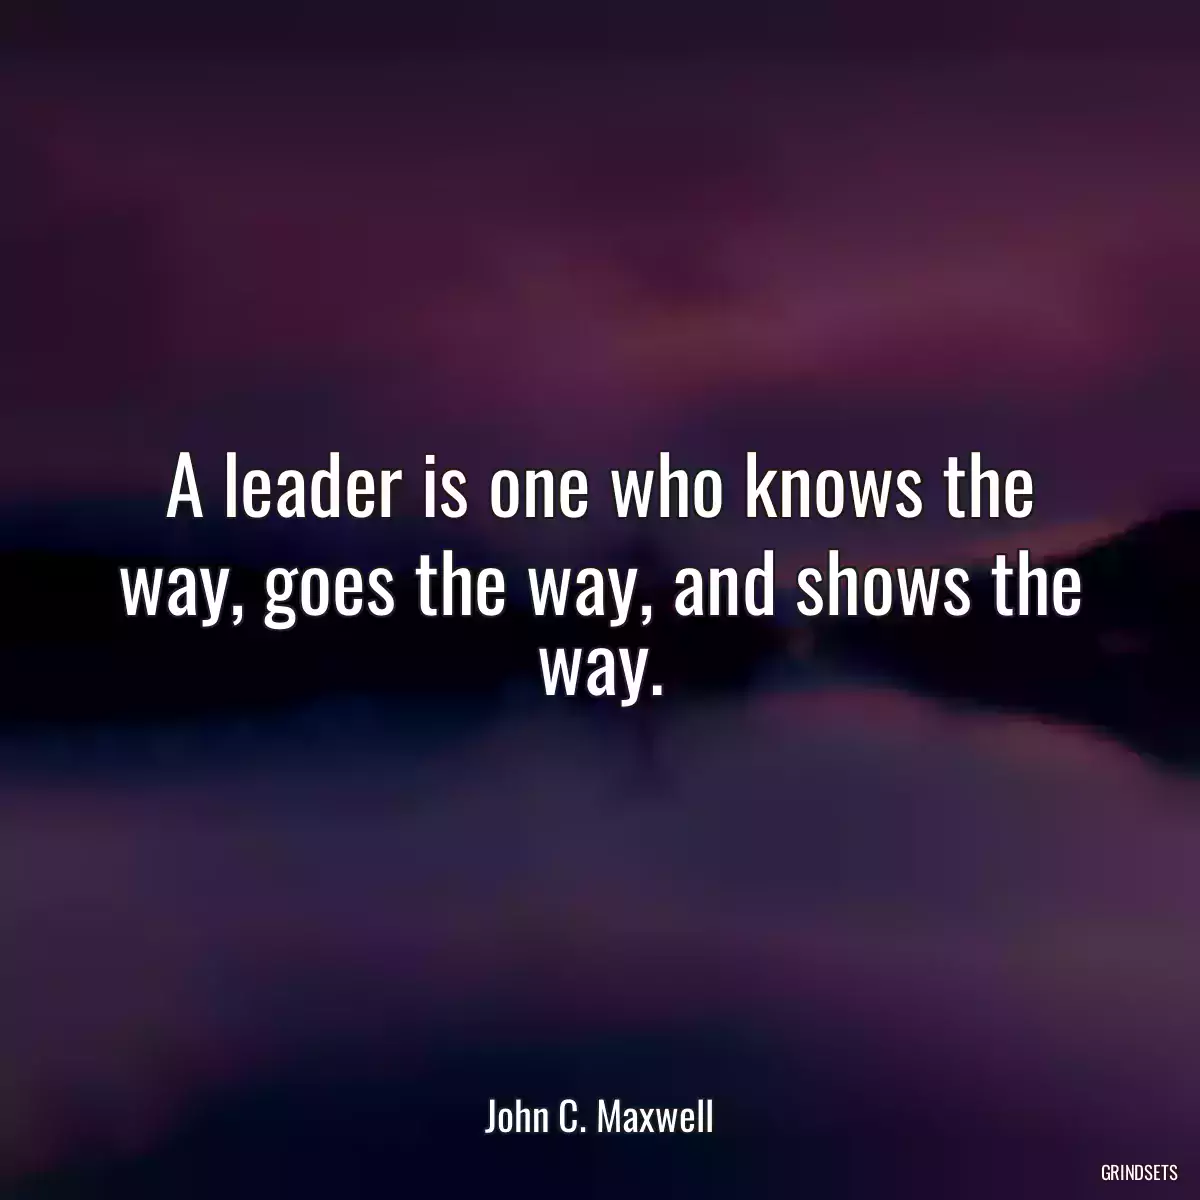 A leader is one who knows the way, goes the way, and shows the way.